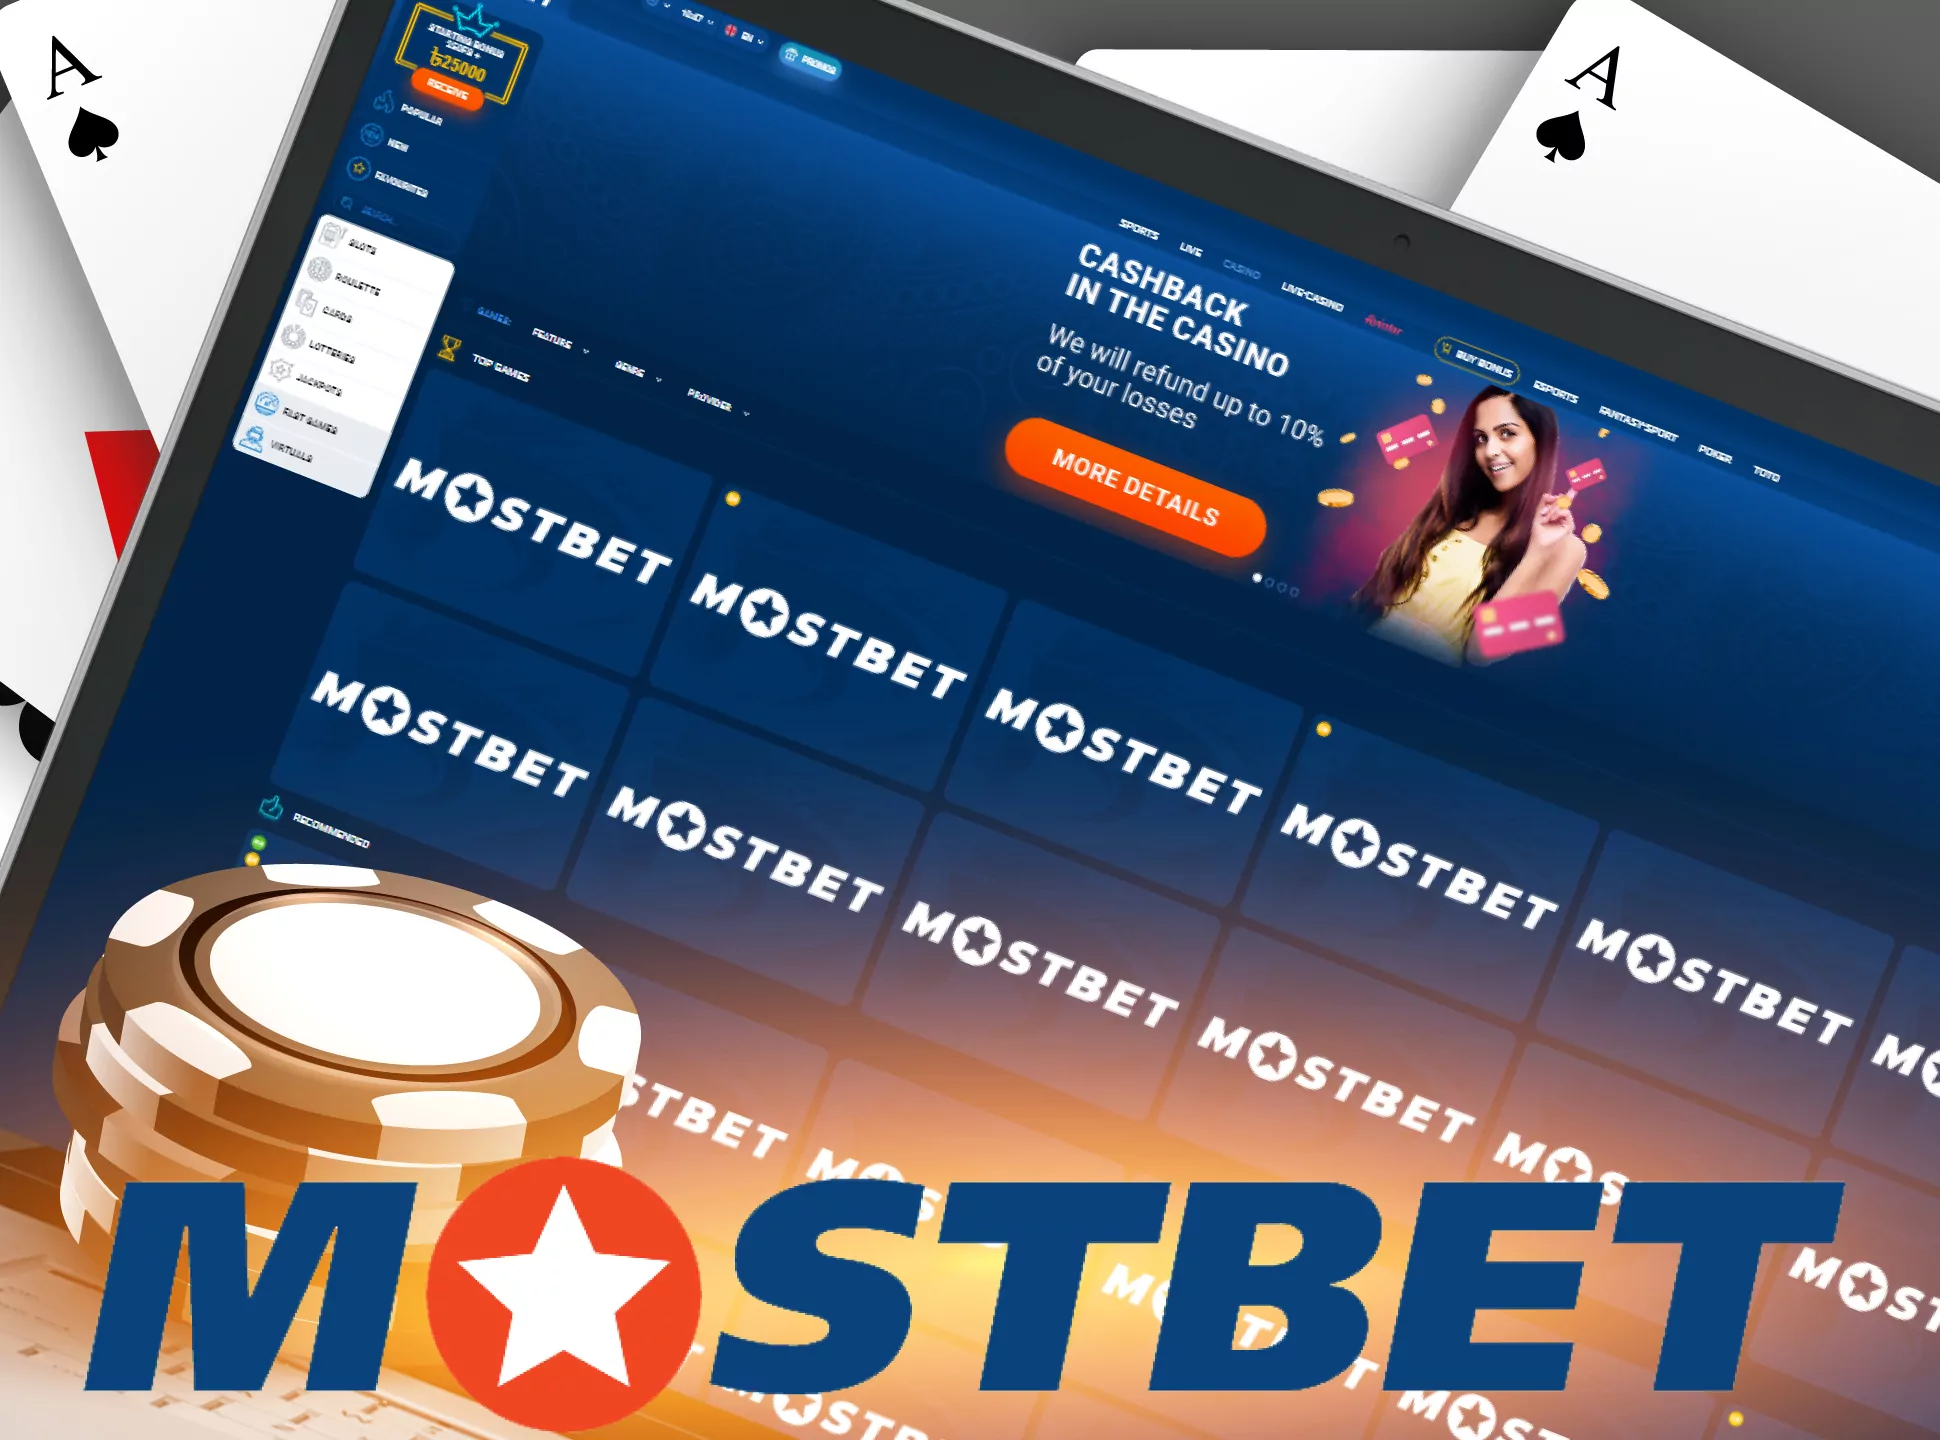 You will find a lot of casino games and bonuses in the Mostbet app.